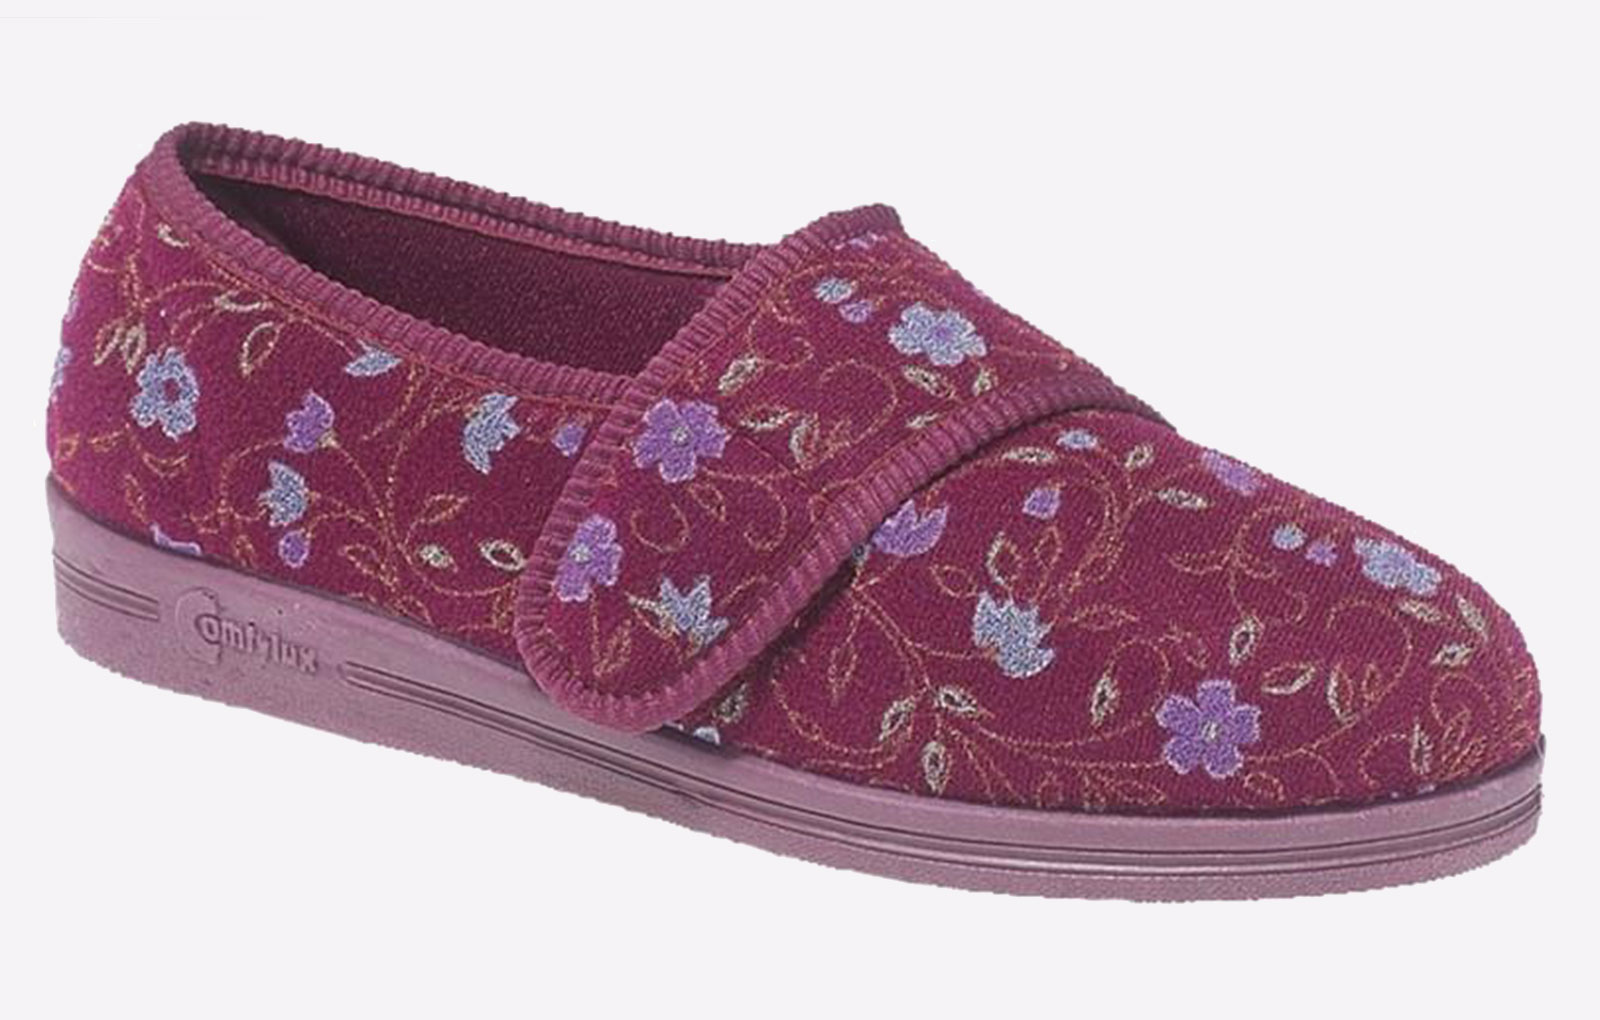 Comfylux Sally Slippers Womens (Relaxed Fit) - GBD-2113